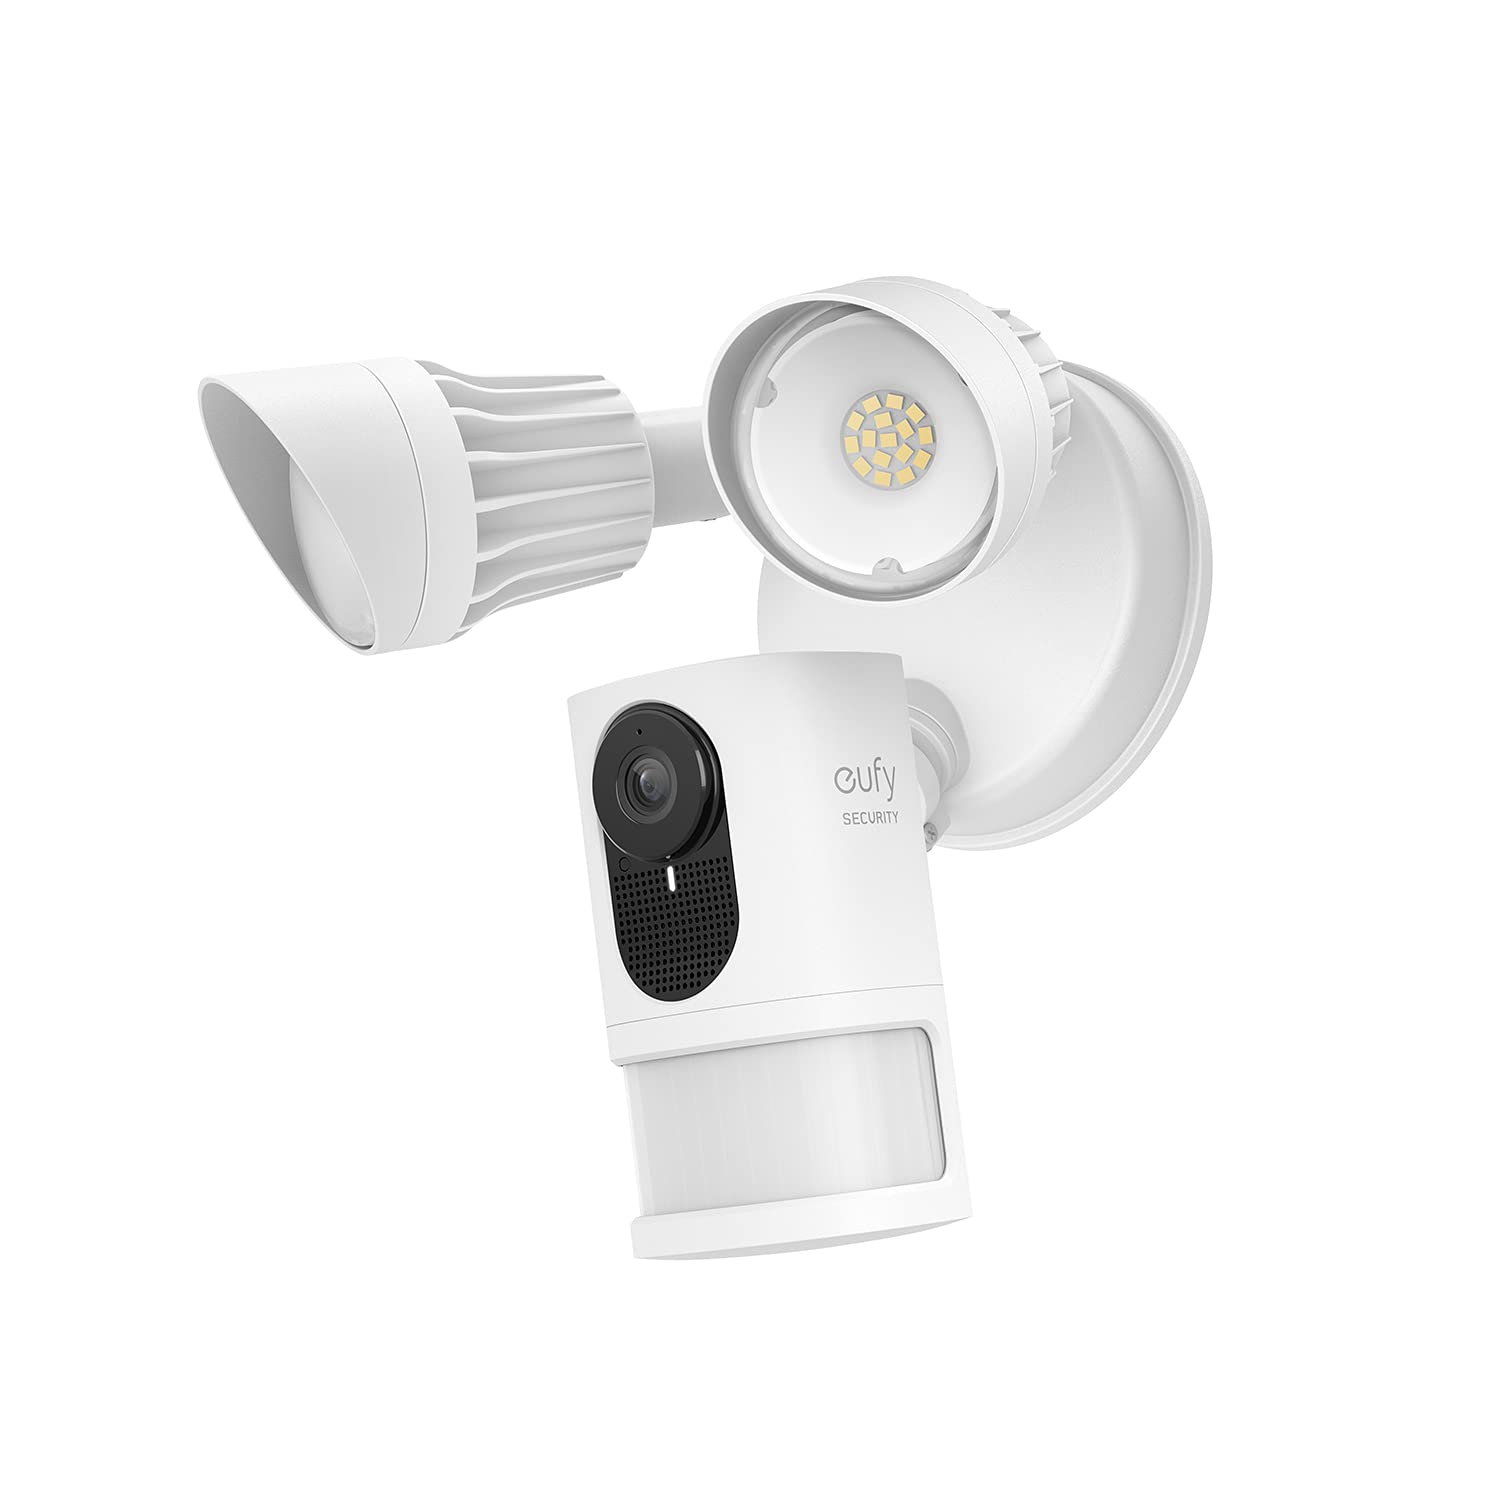 eufy Security Floodlight Cam E220, 2K, No Monthly Fees, 2000 Lumens, Weatherproof, Built-in AI, Non-Stop Power, Motion Only Alert White, List Price is $199.99, Now Only $89.99, You Save $110